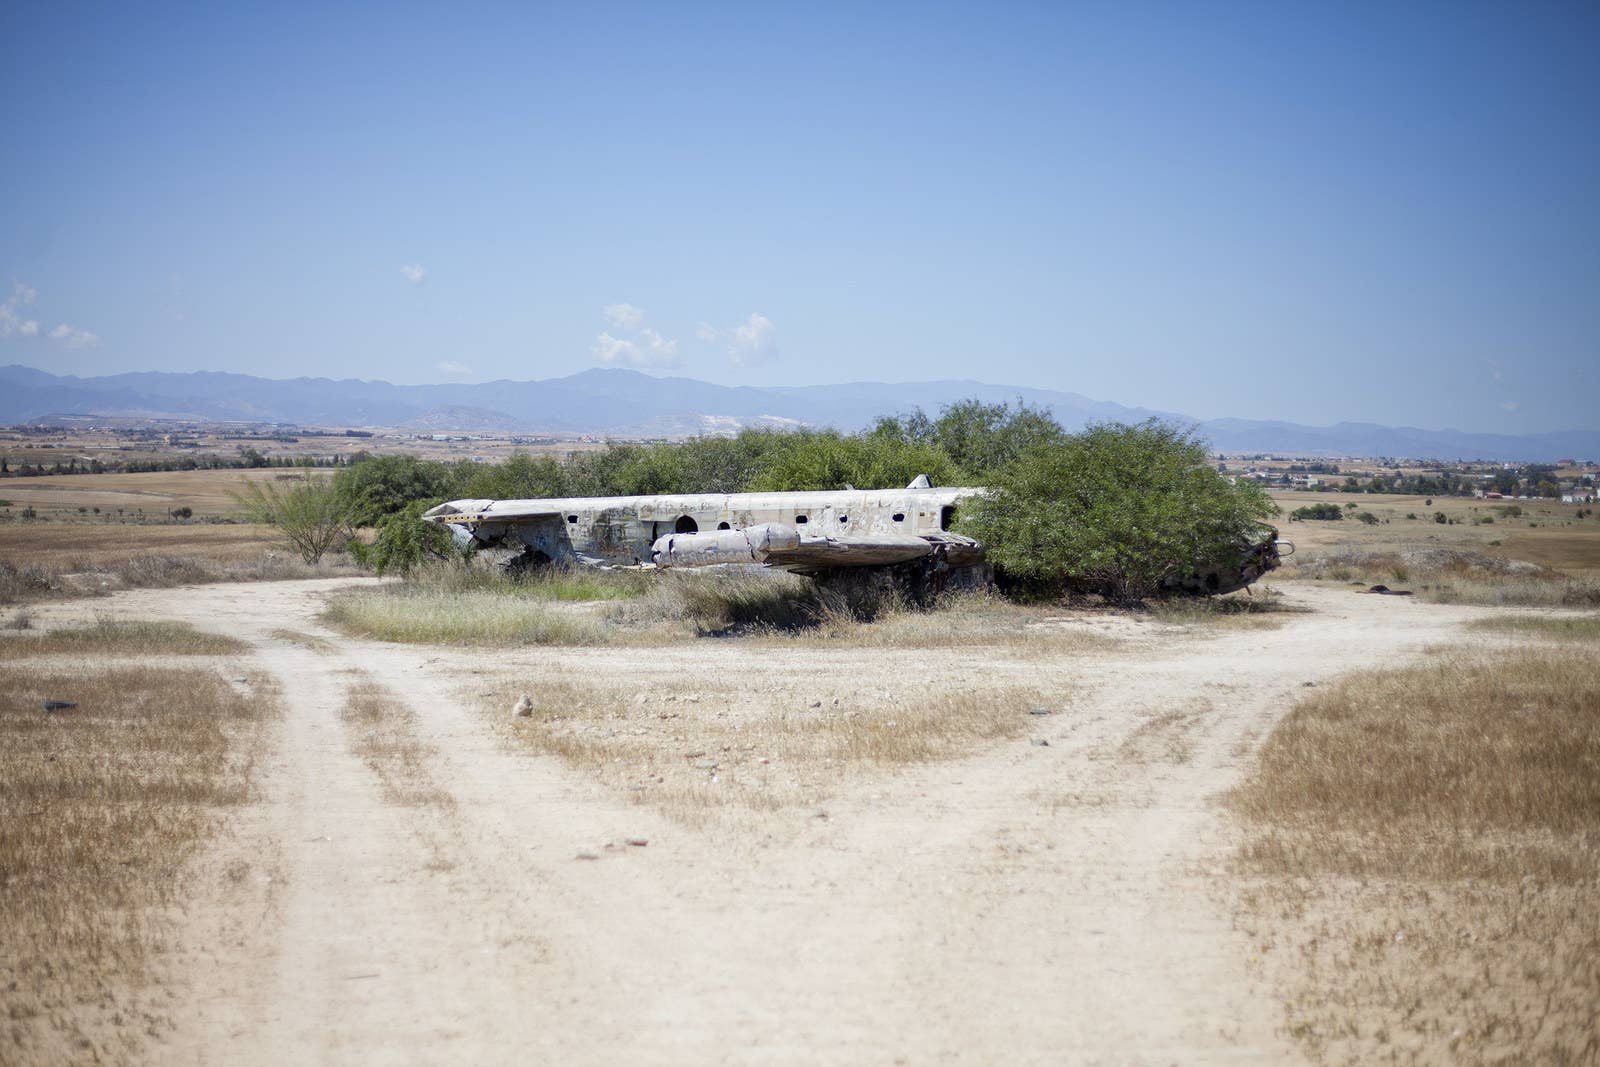 Remains of an Avro Shackleton aircraft is reclaimed by brush and wilderness.